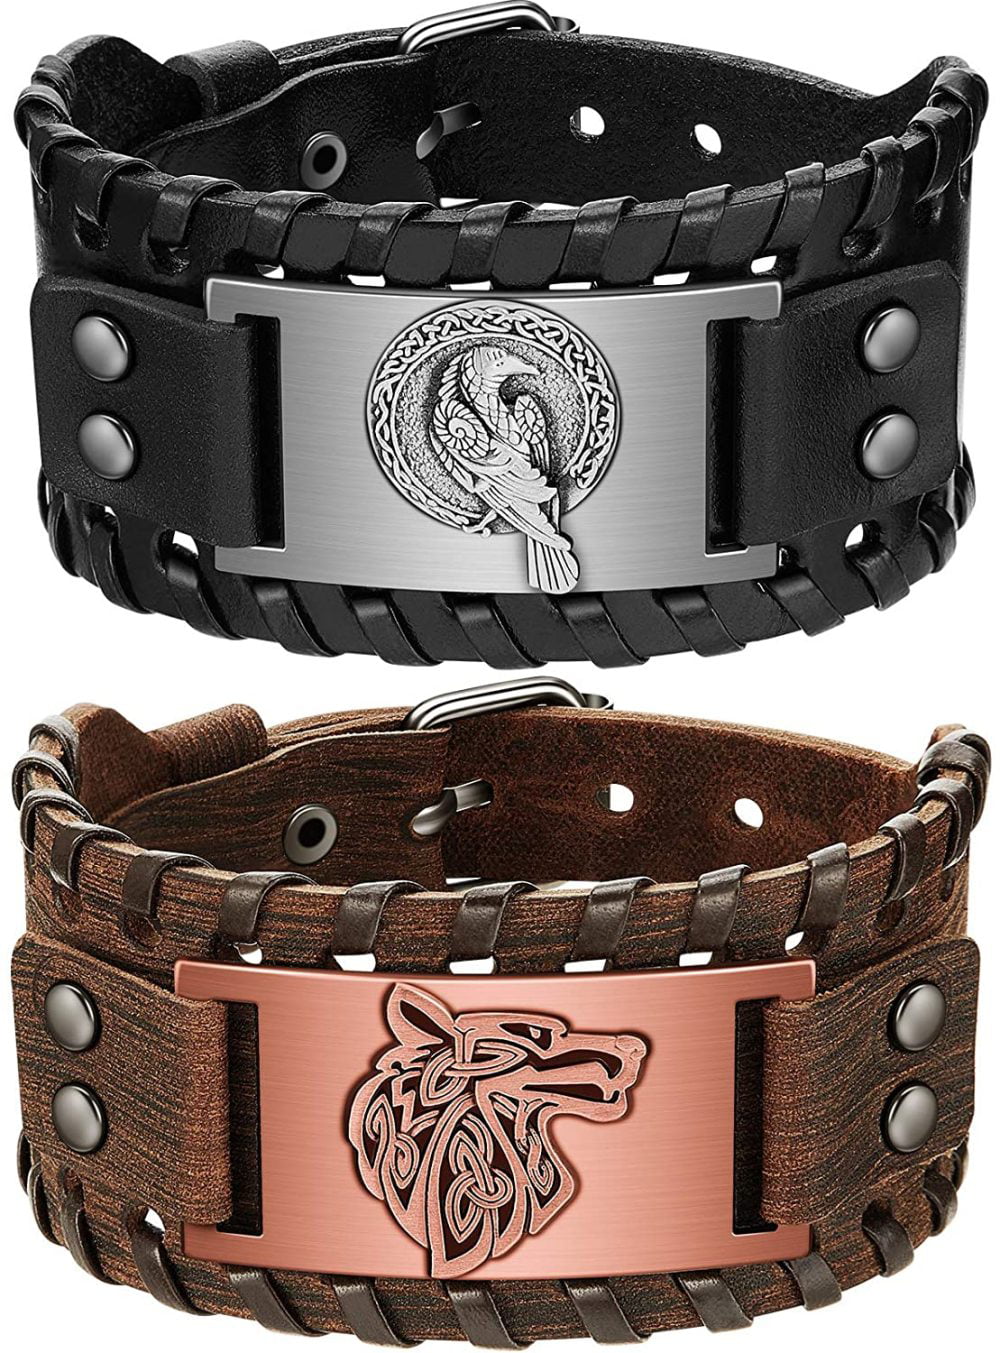 bracelet ALCHEMY GOTHIC Dark Wolf Leather Wriststraps  Brands  A   ALCHEMY GOTHIC Rock Gadgets  Bracelets and Wristbands Motorcycle Clothes   Jewellery  metalRoutepl rock shop and motorcycle shop